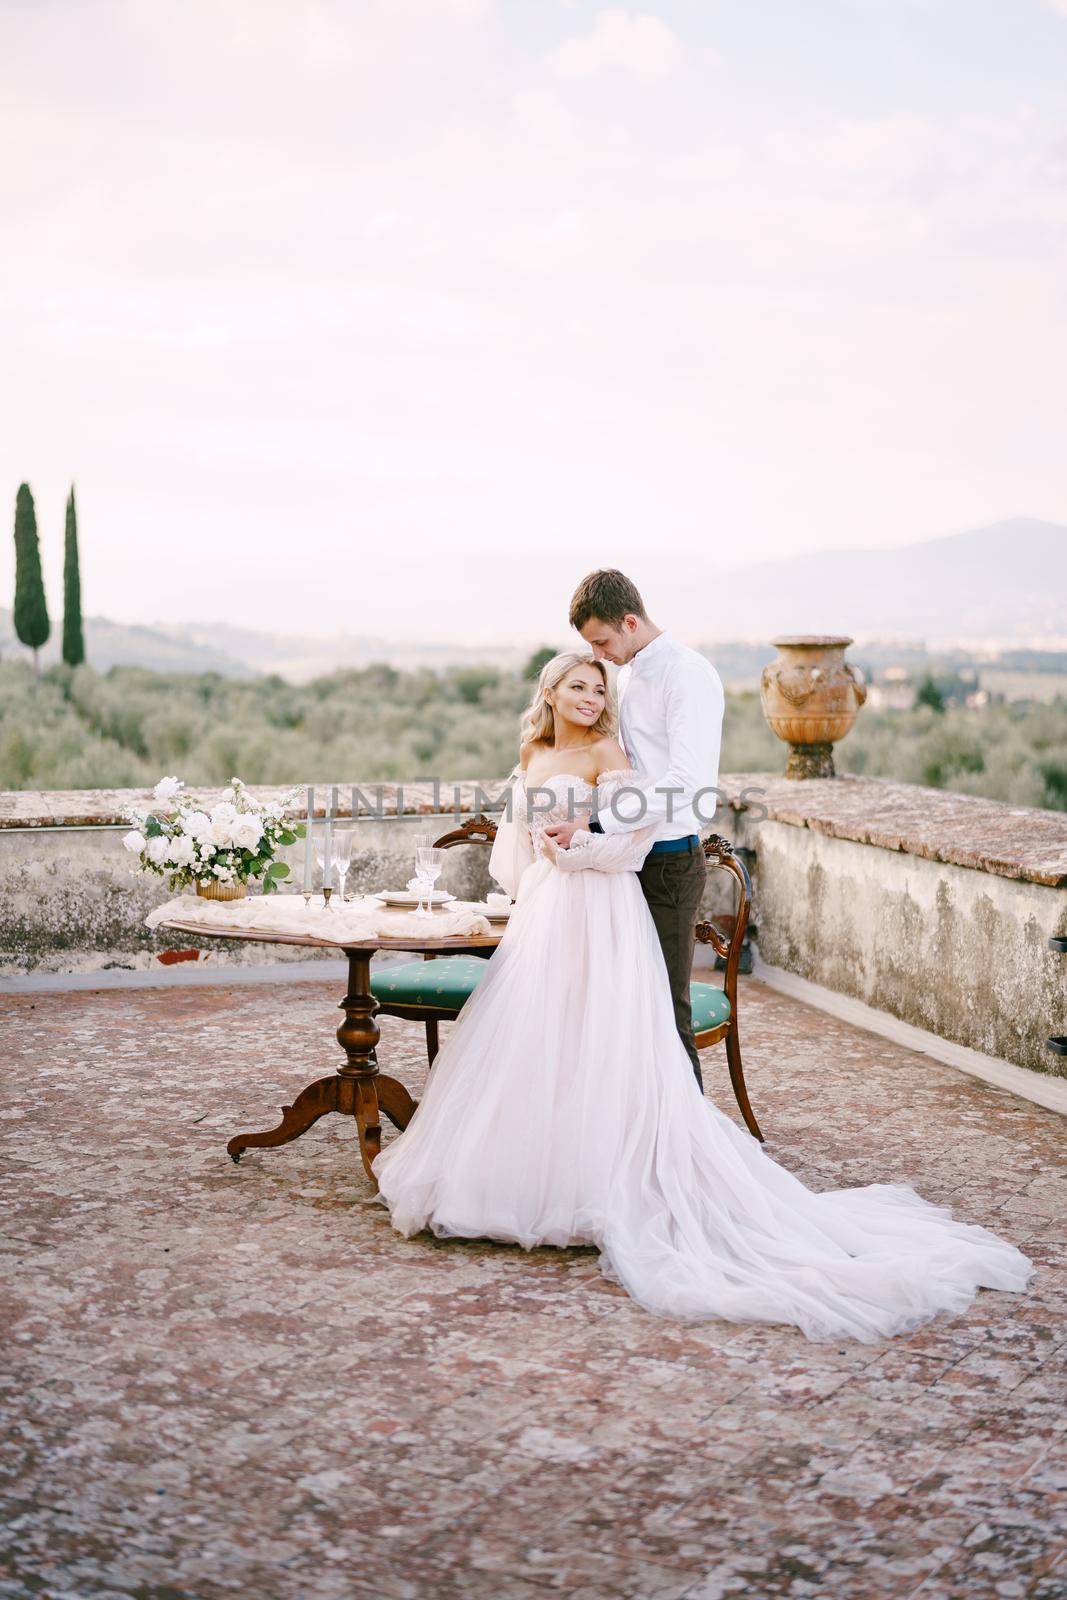 Wedding at an old winery villa in Tuscany, Italy. A wedding couple is standing near the table for a wedding dinner, the groom hugs the bride by the waist. by Nadtochiy